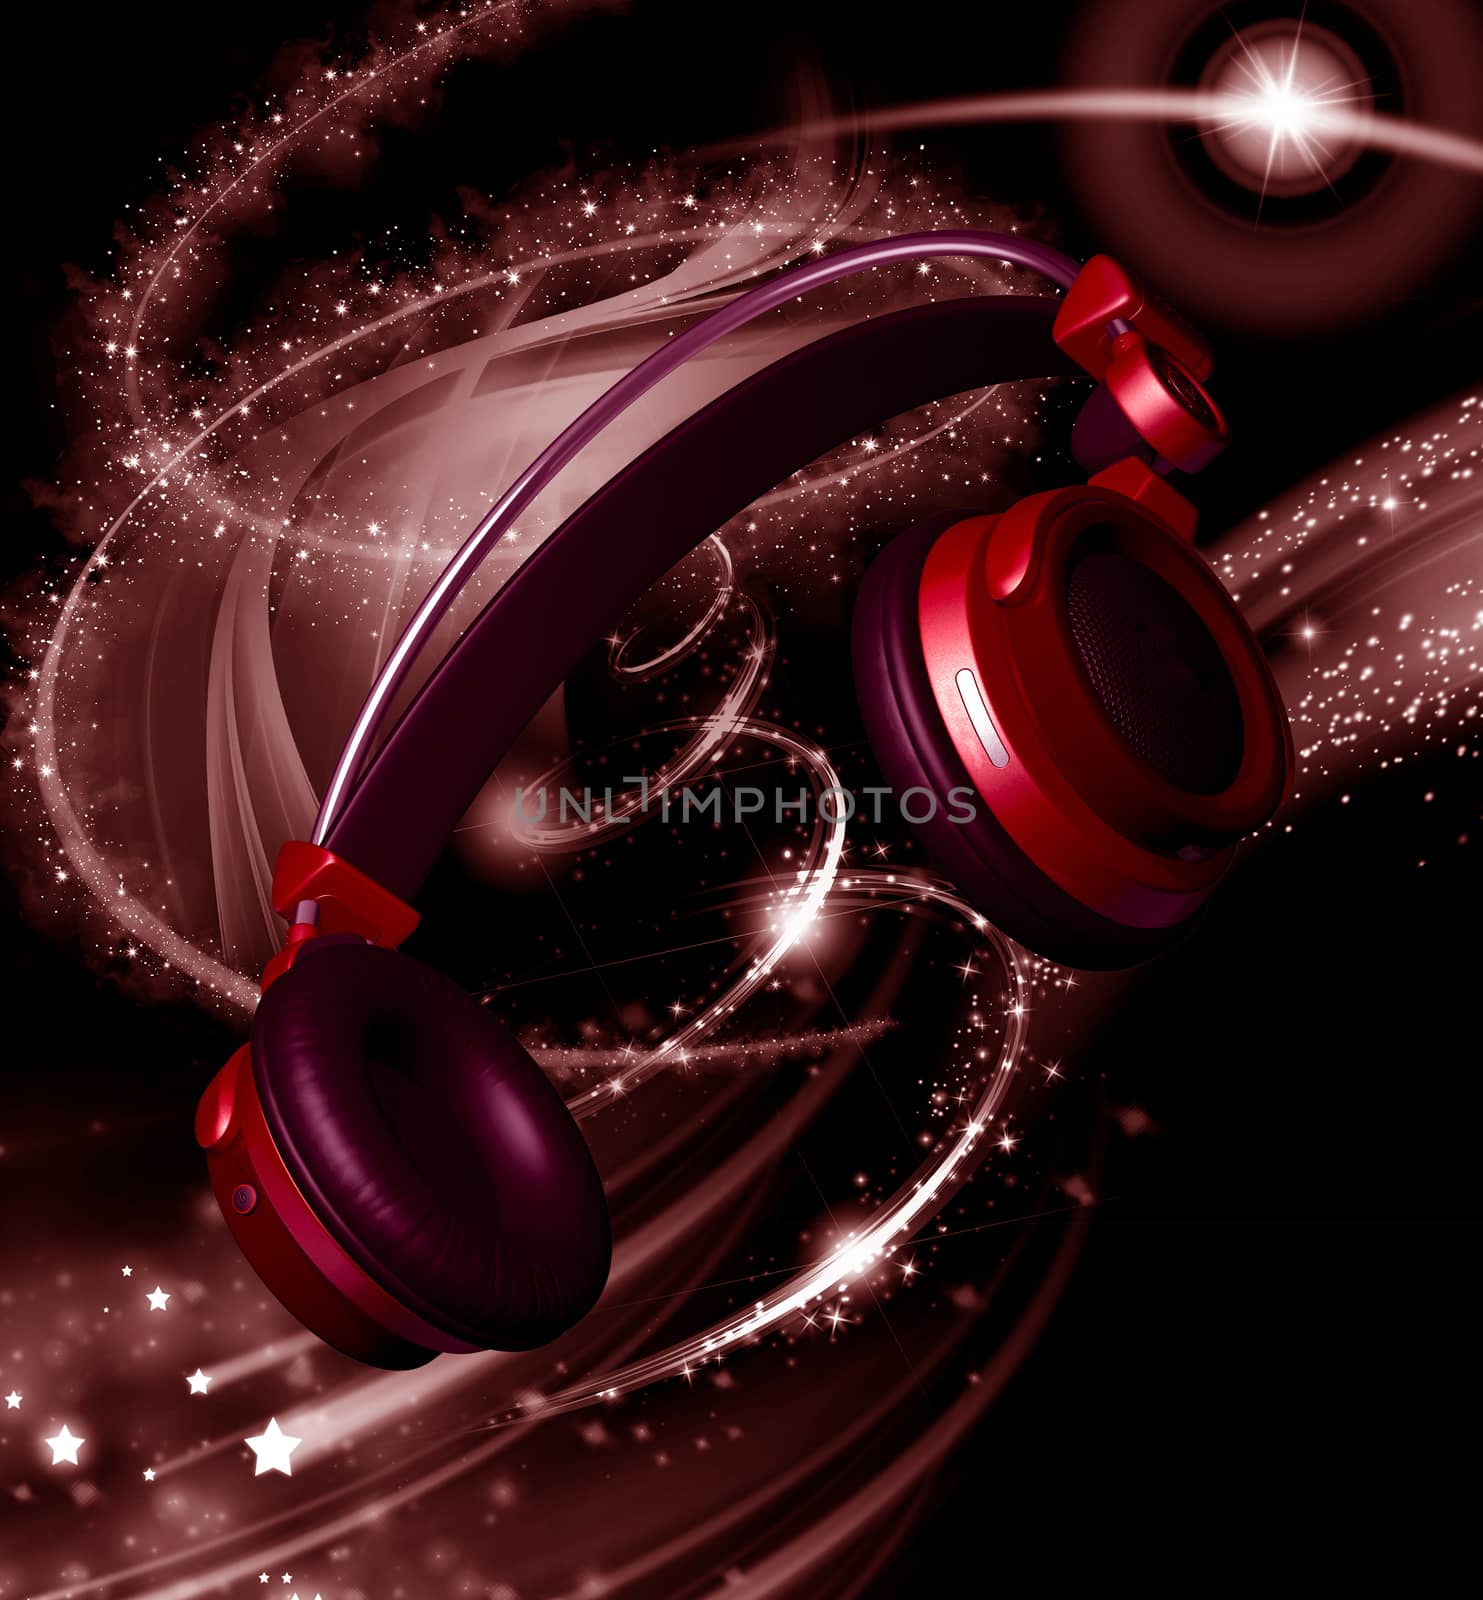 Realistic headphones with stars dust at black background